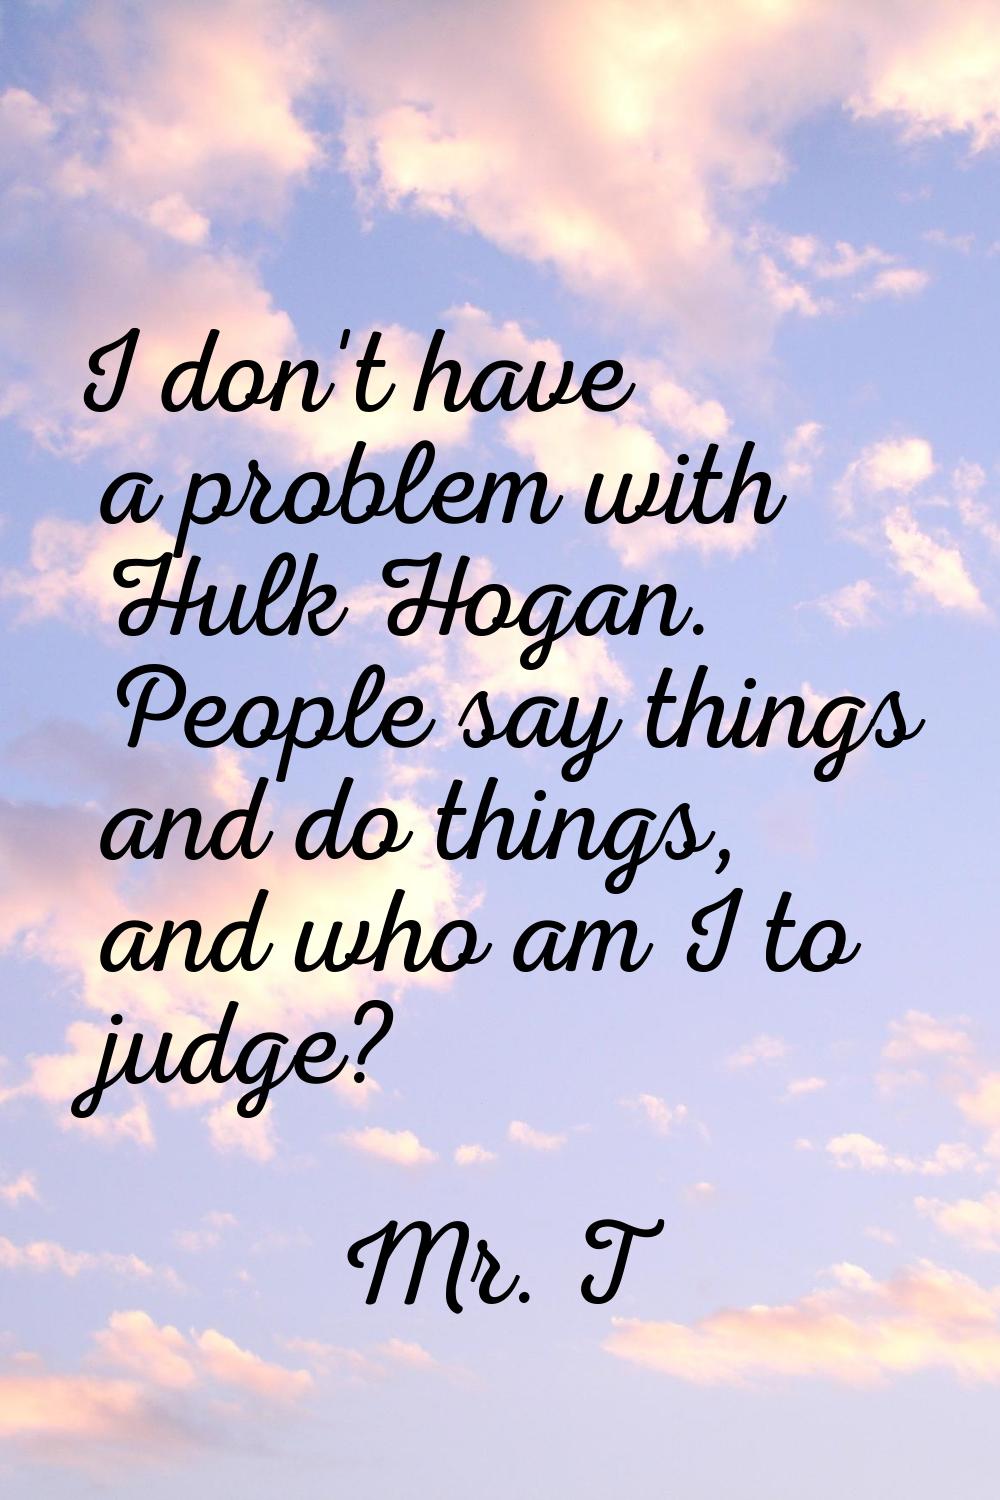 I don't have a problem with Hulk Hogan. People say things and do things, and who am I to judge?